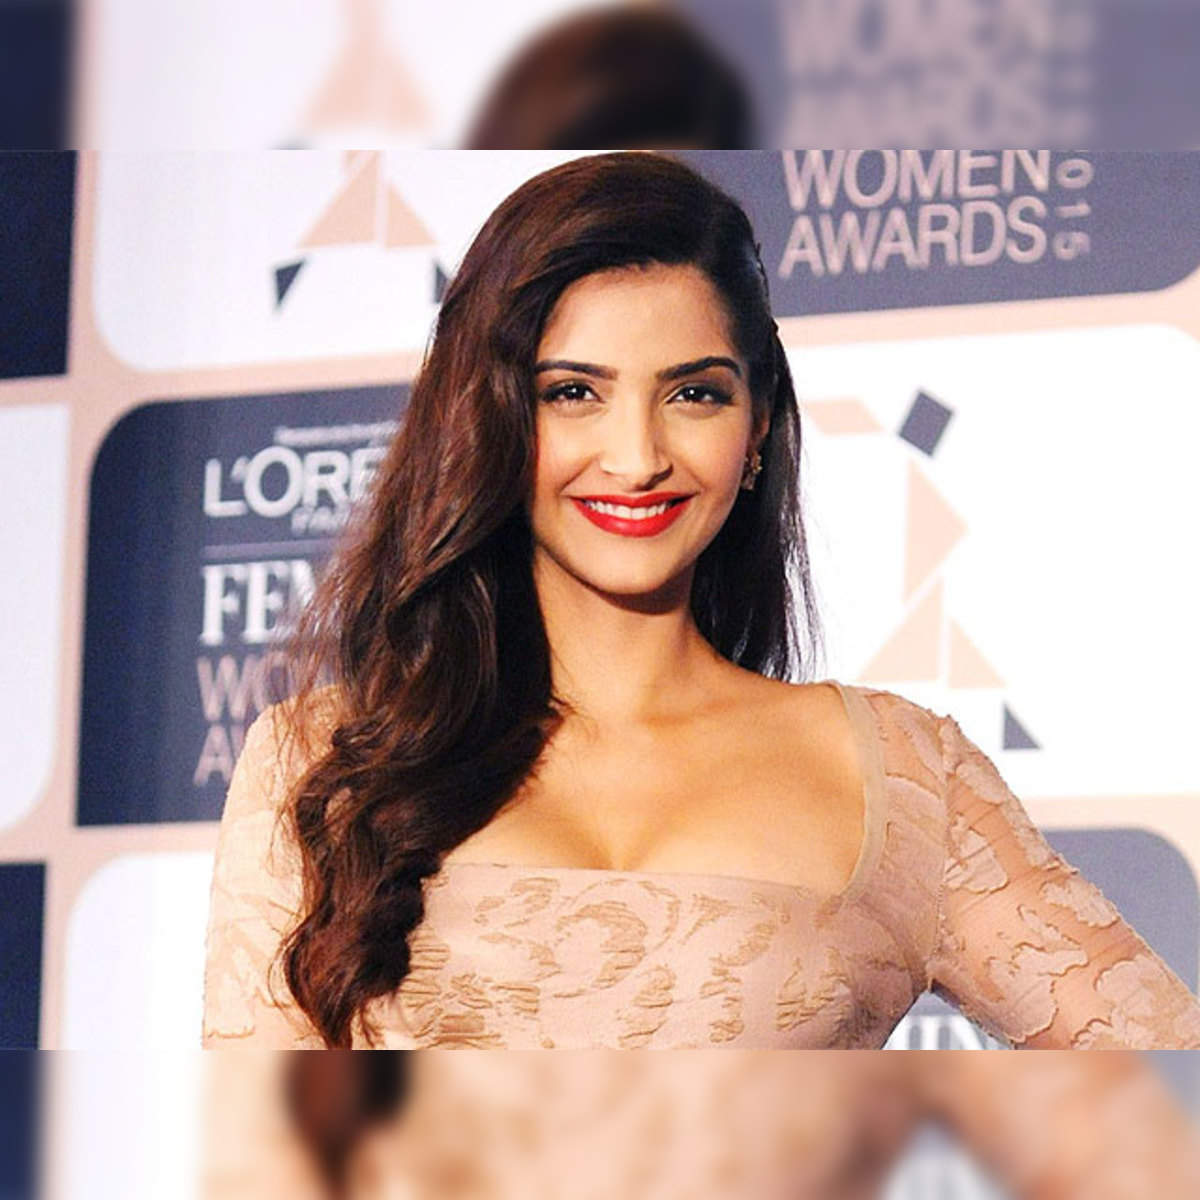 Sonam Kapoor discharged from hospital - The Economic Times